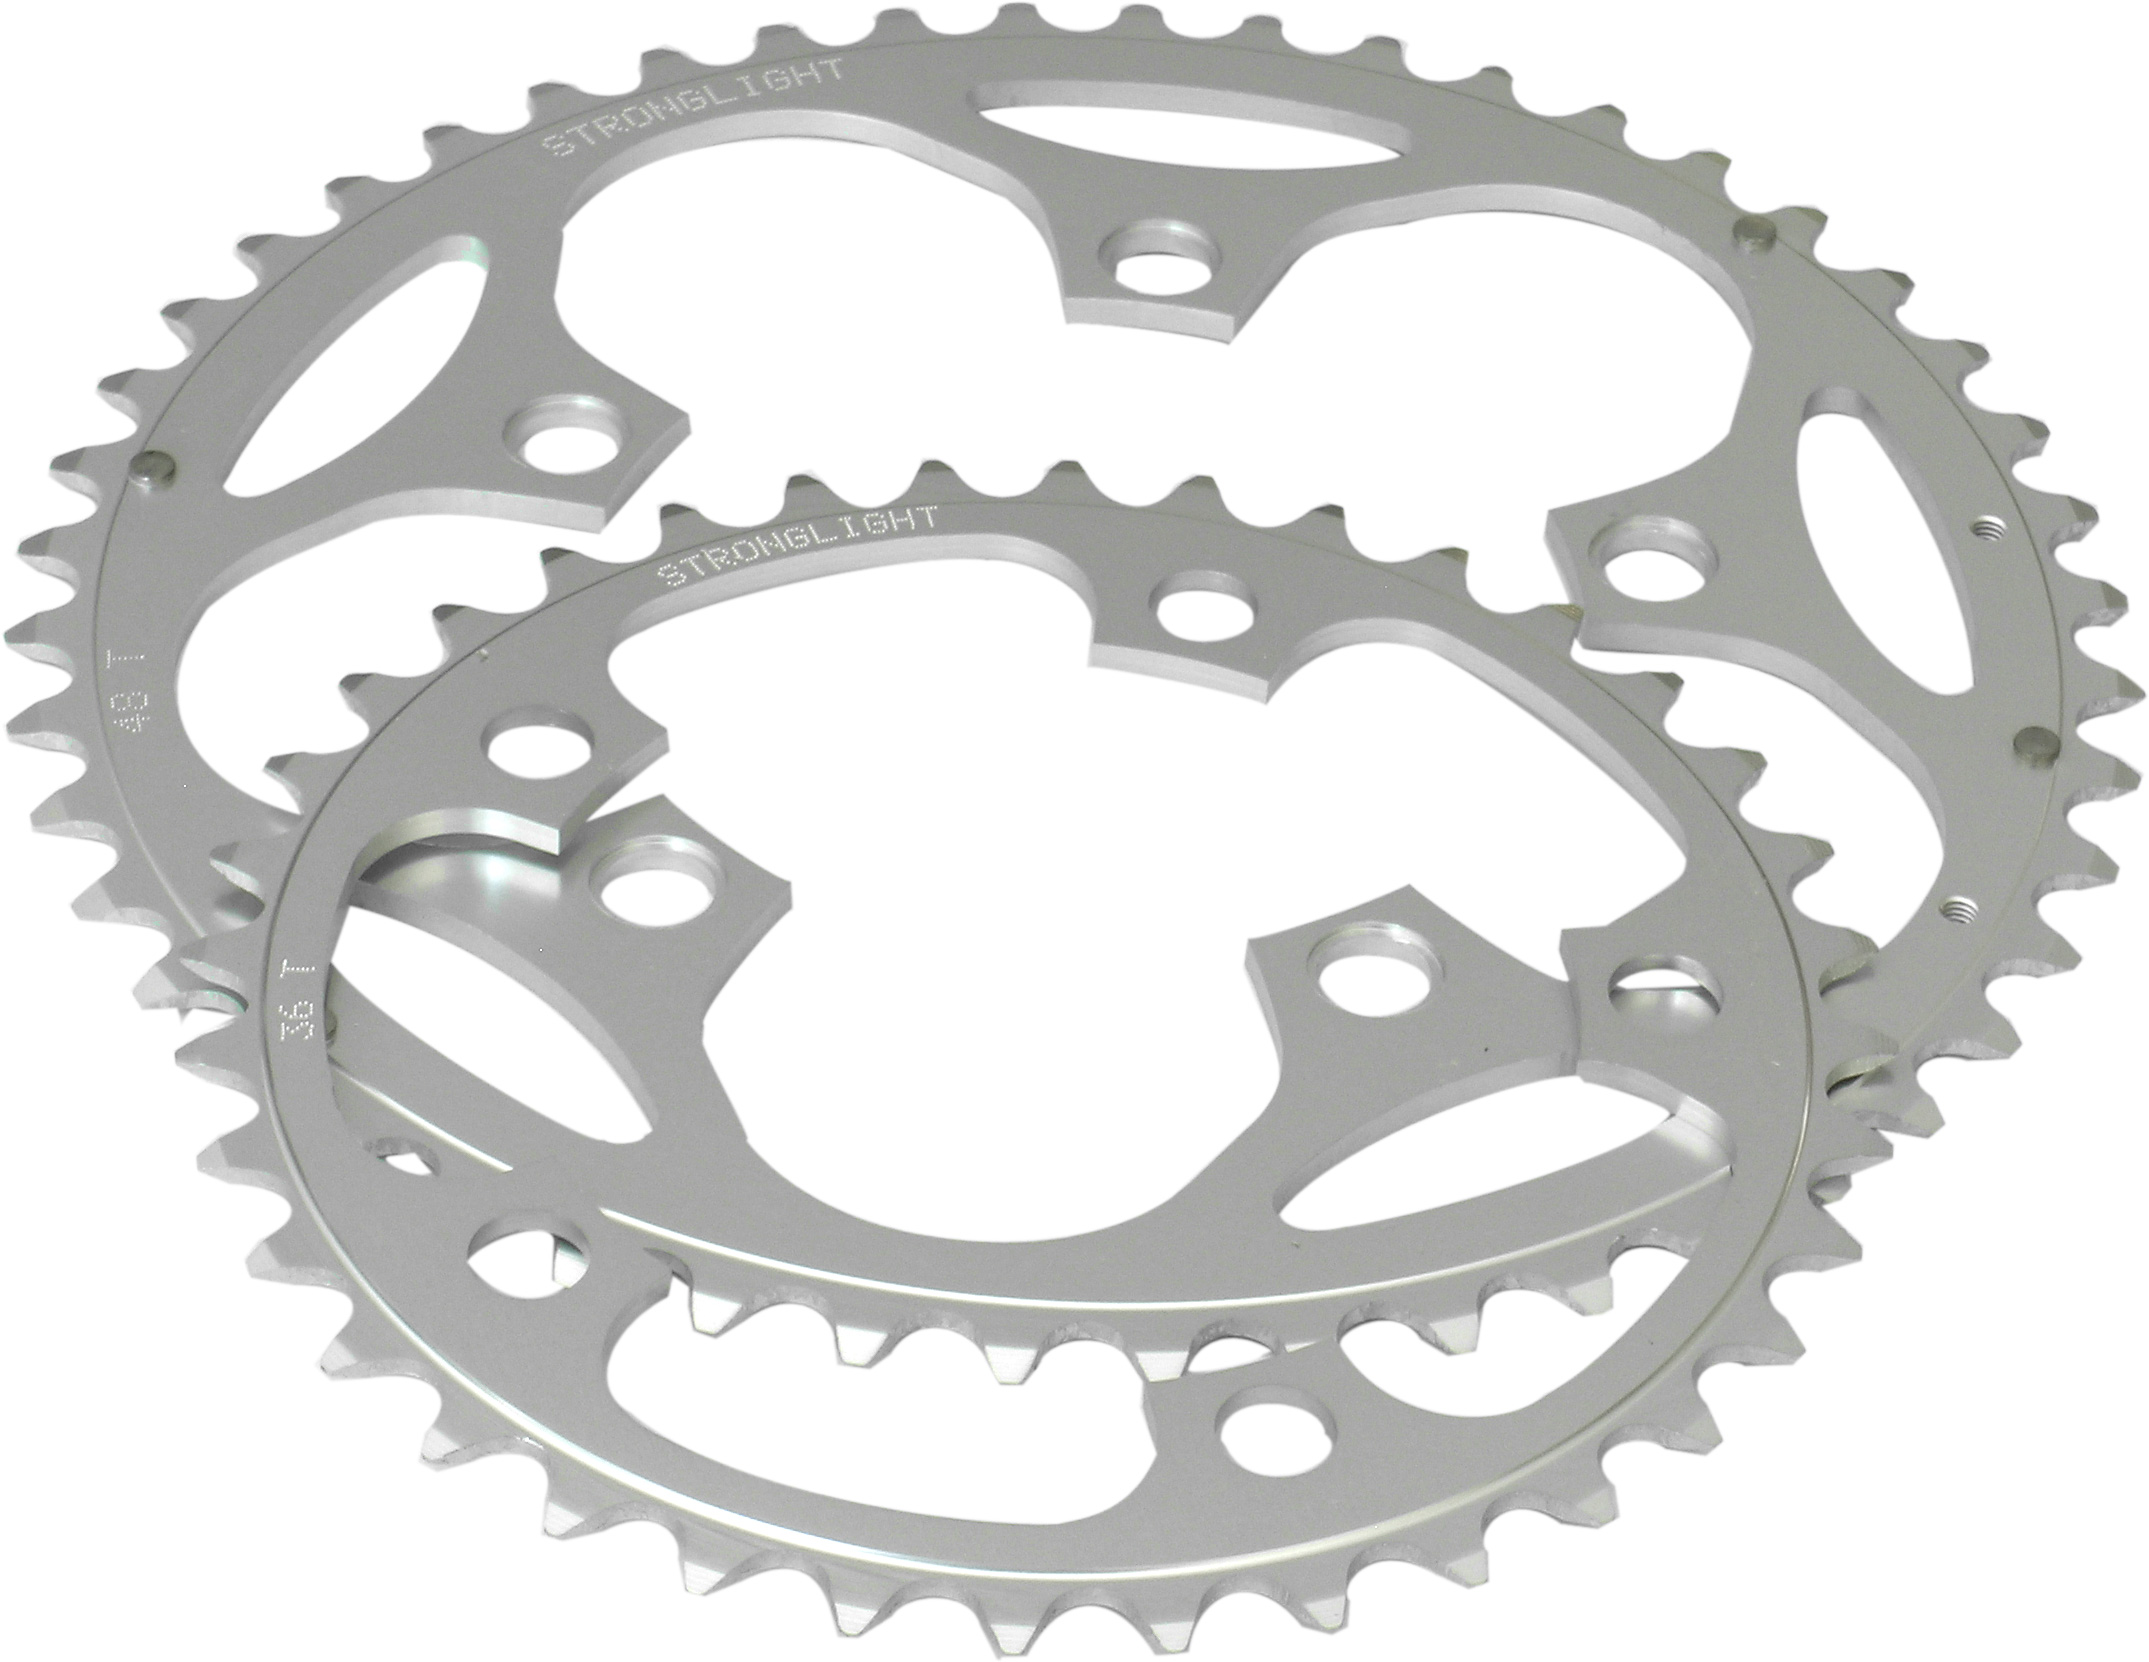 RD11048S Stronglight 48T Silver 5-Arm Alloy Chainring